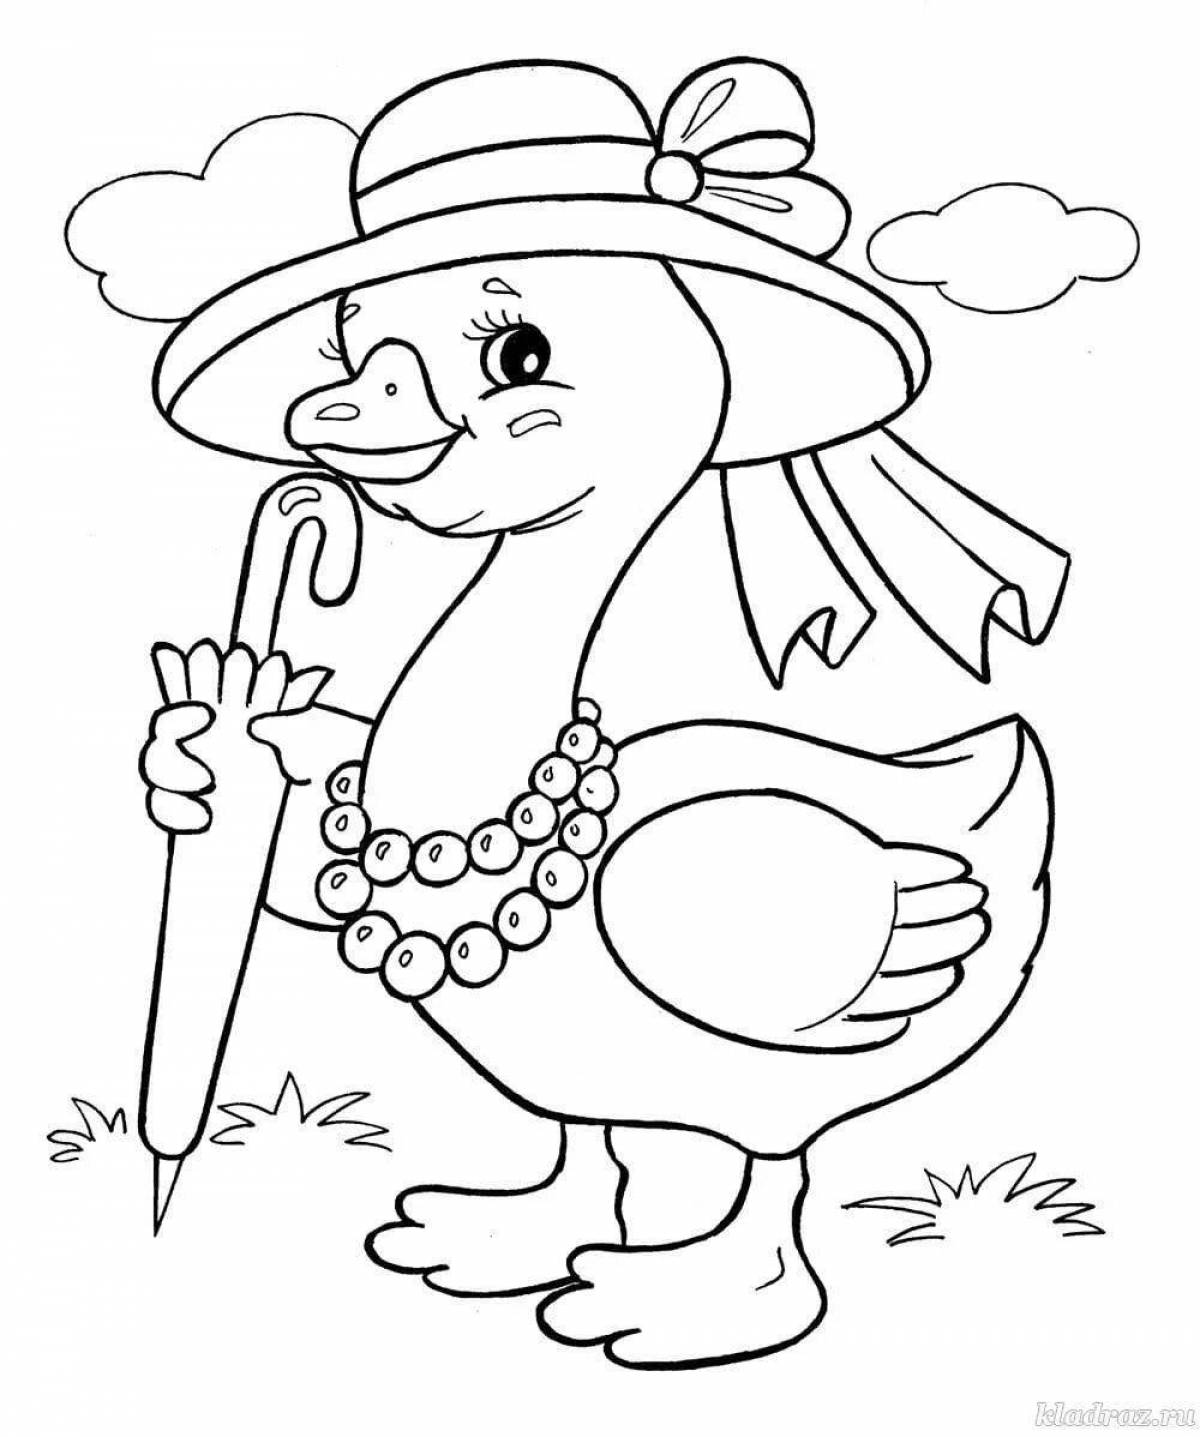 Coloring pages for kids for kids #8